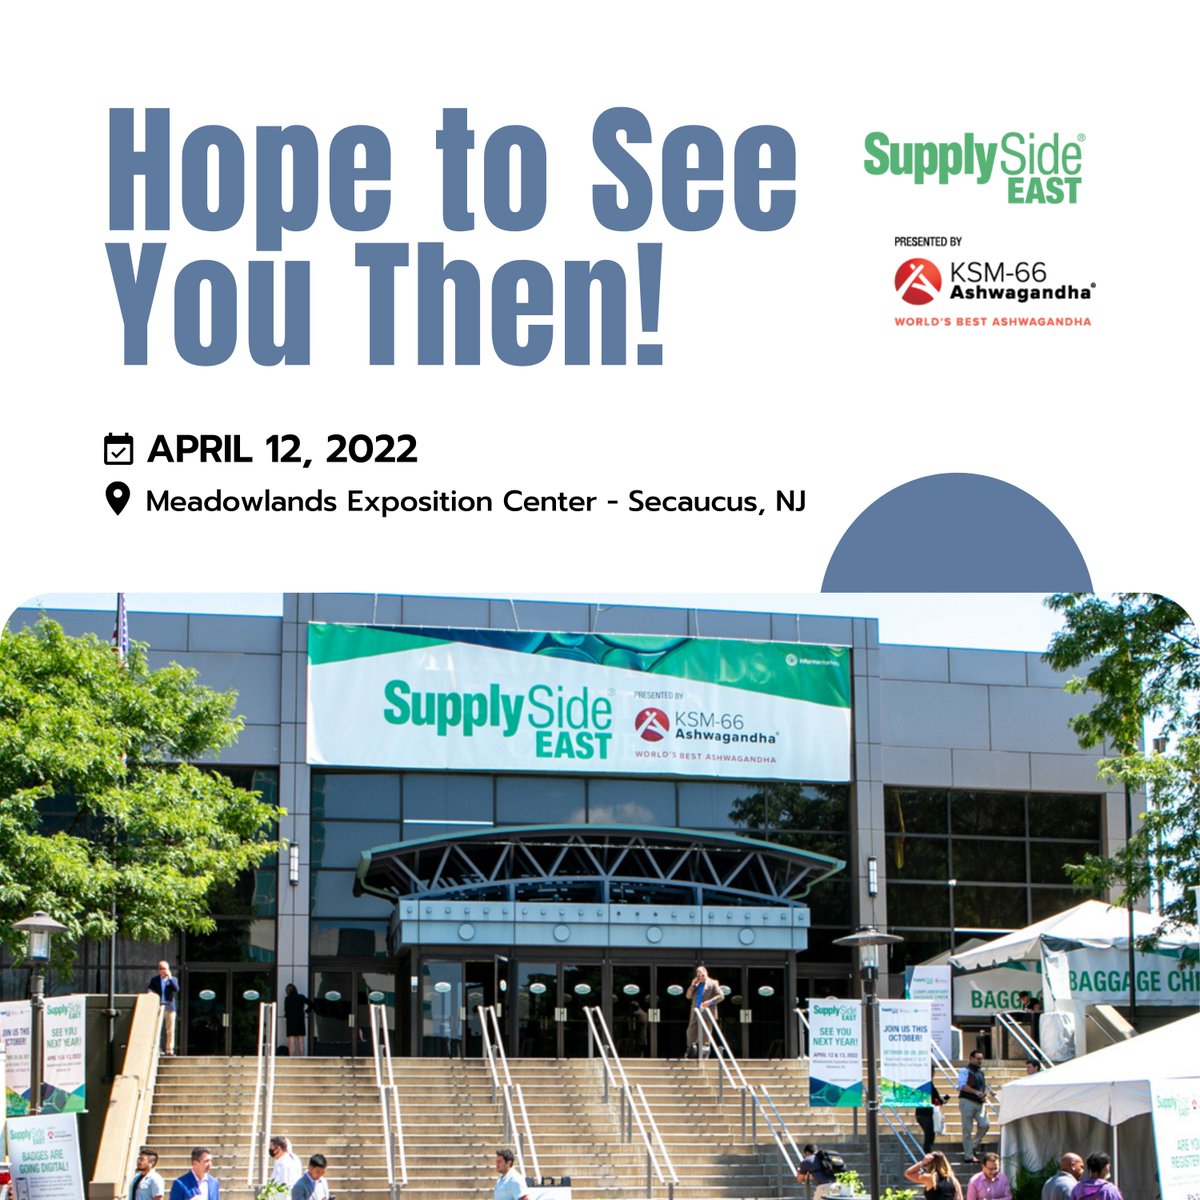 We will be attending @SupplySide East tomorrow - Tuesday, April 12, 2022! We hope to see you there! #SSEexpo